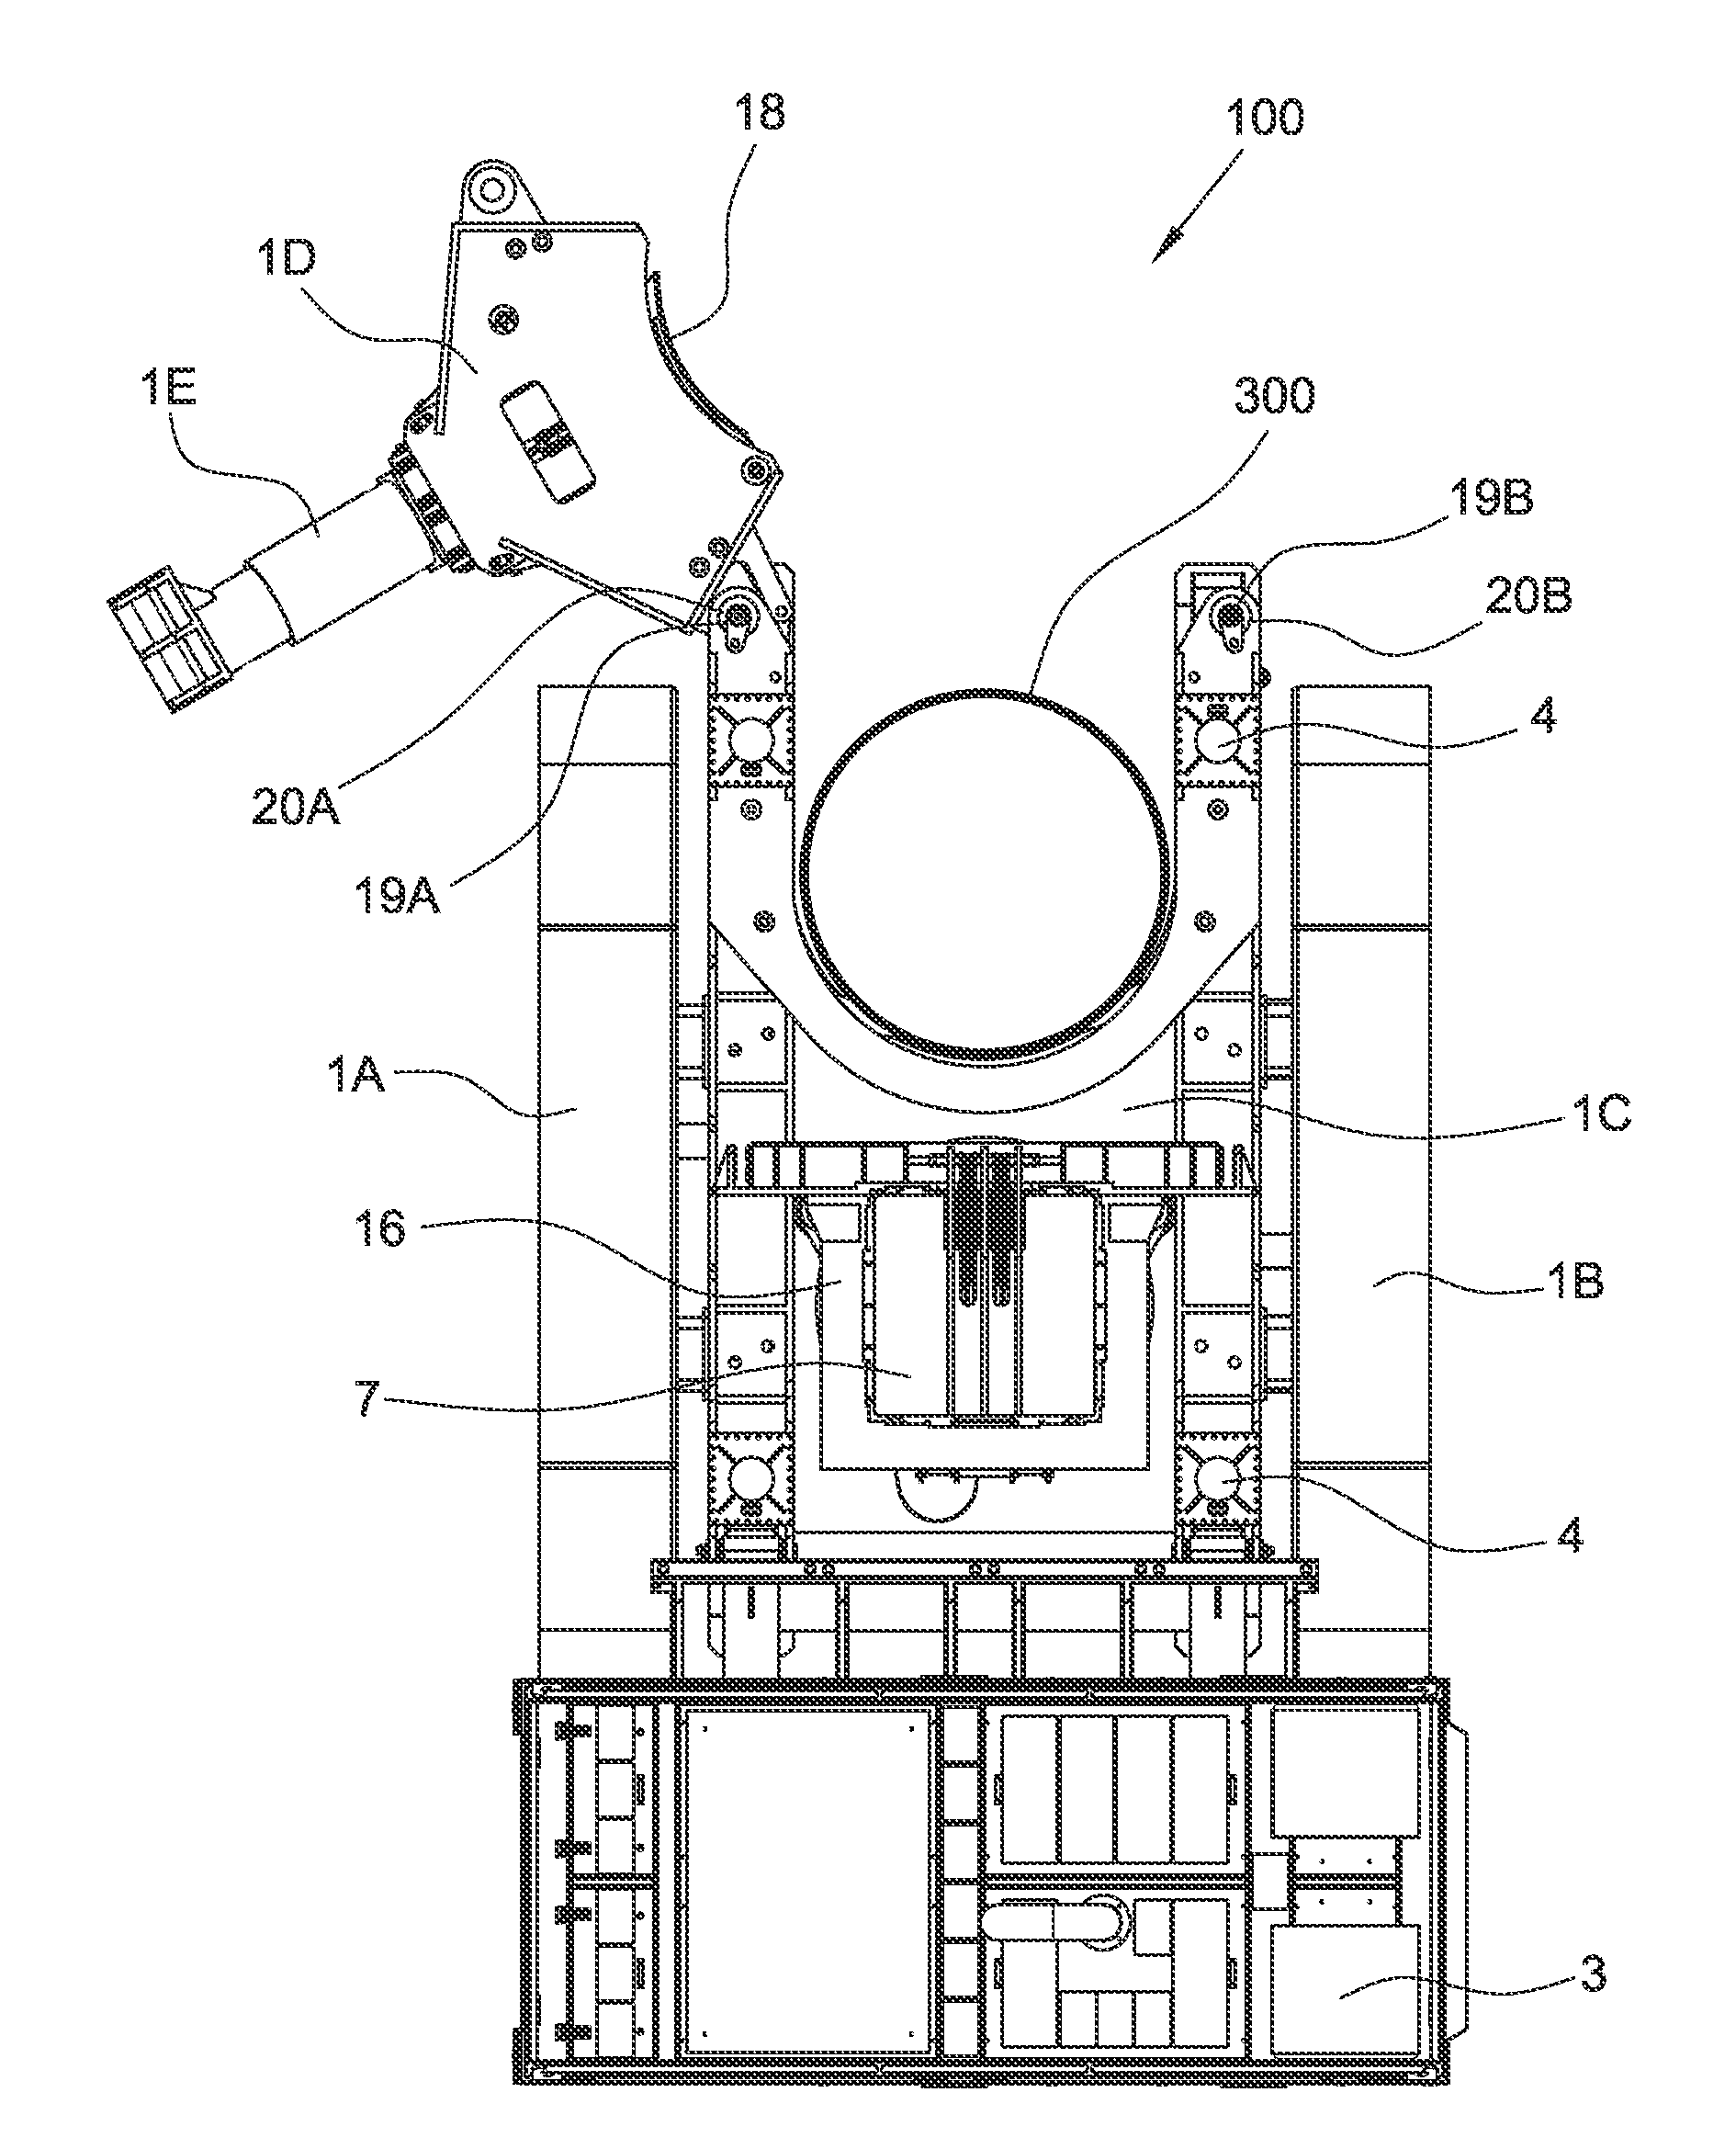 Device for deep driving of tubes having a large diameter